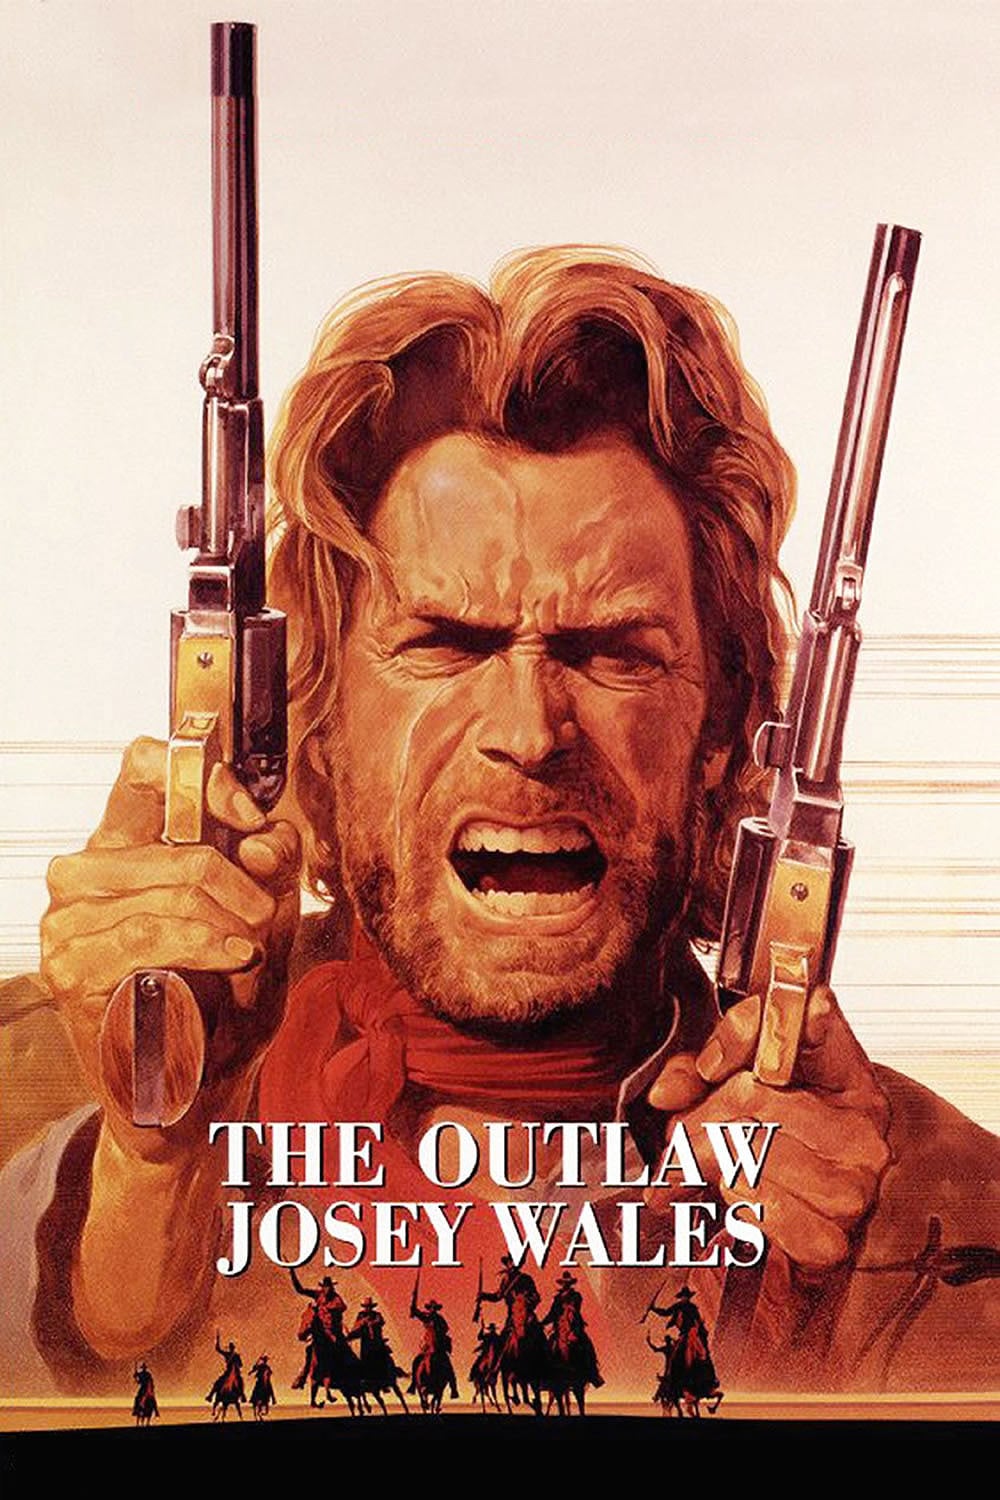 Poster for the movie "The Outlaw Josey Wales"